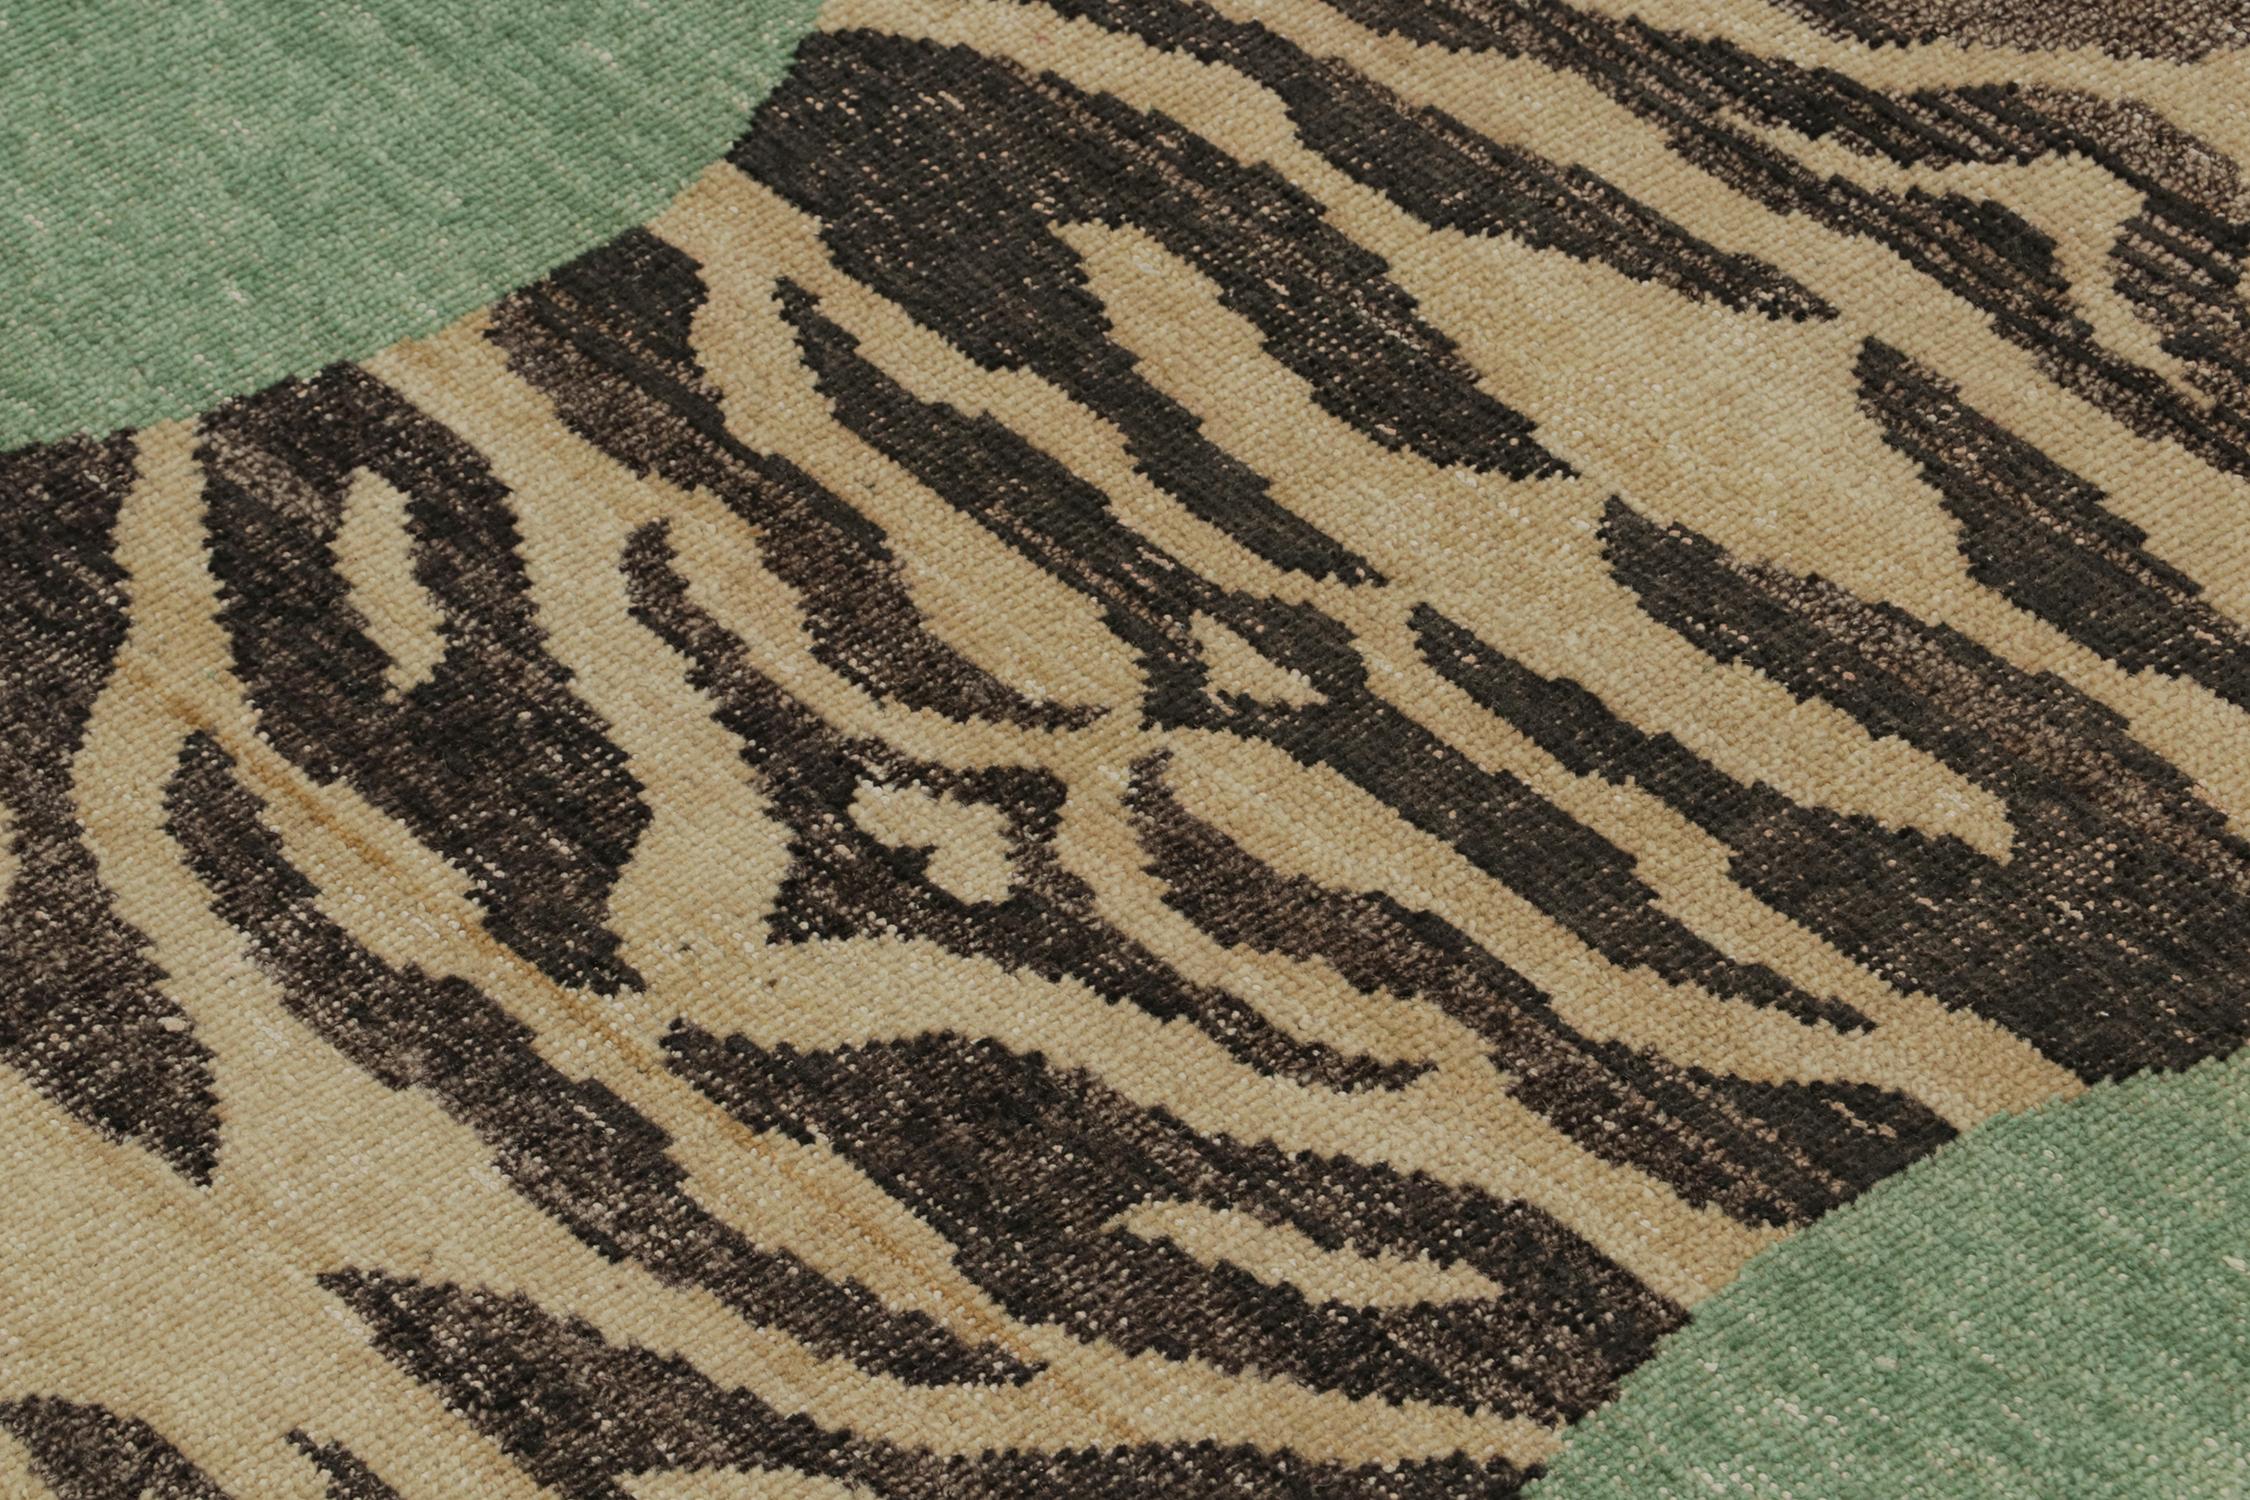 Contemporary Rug & Kilim’s Distressed Style Tiger Skin Rug in Green, Beige & Black Pictorial  For Sale